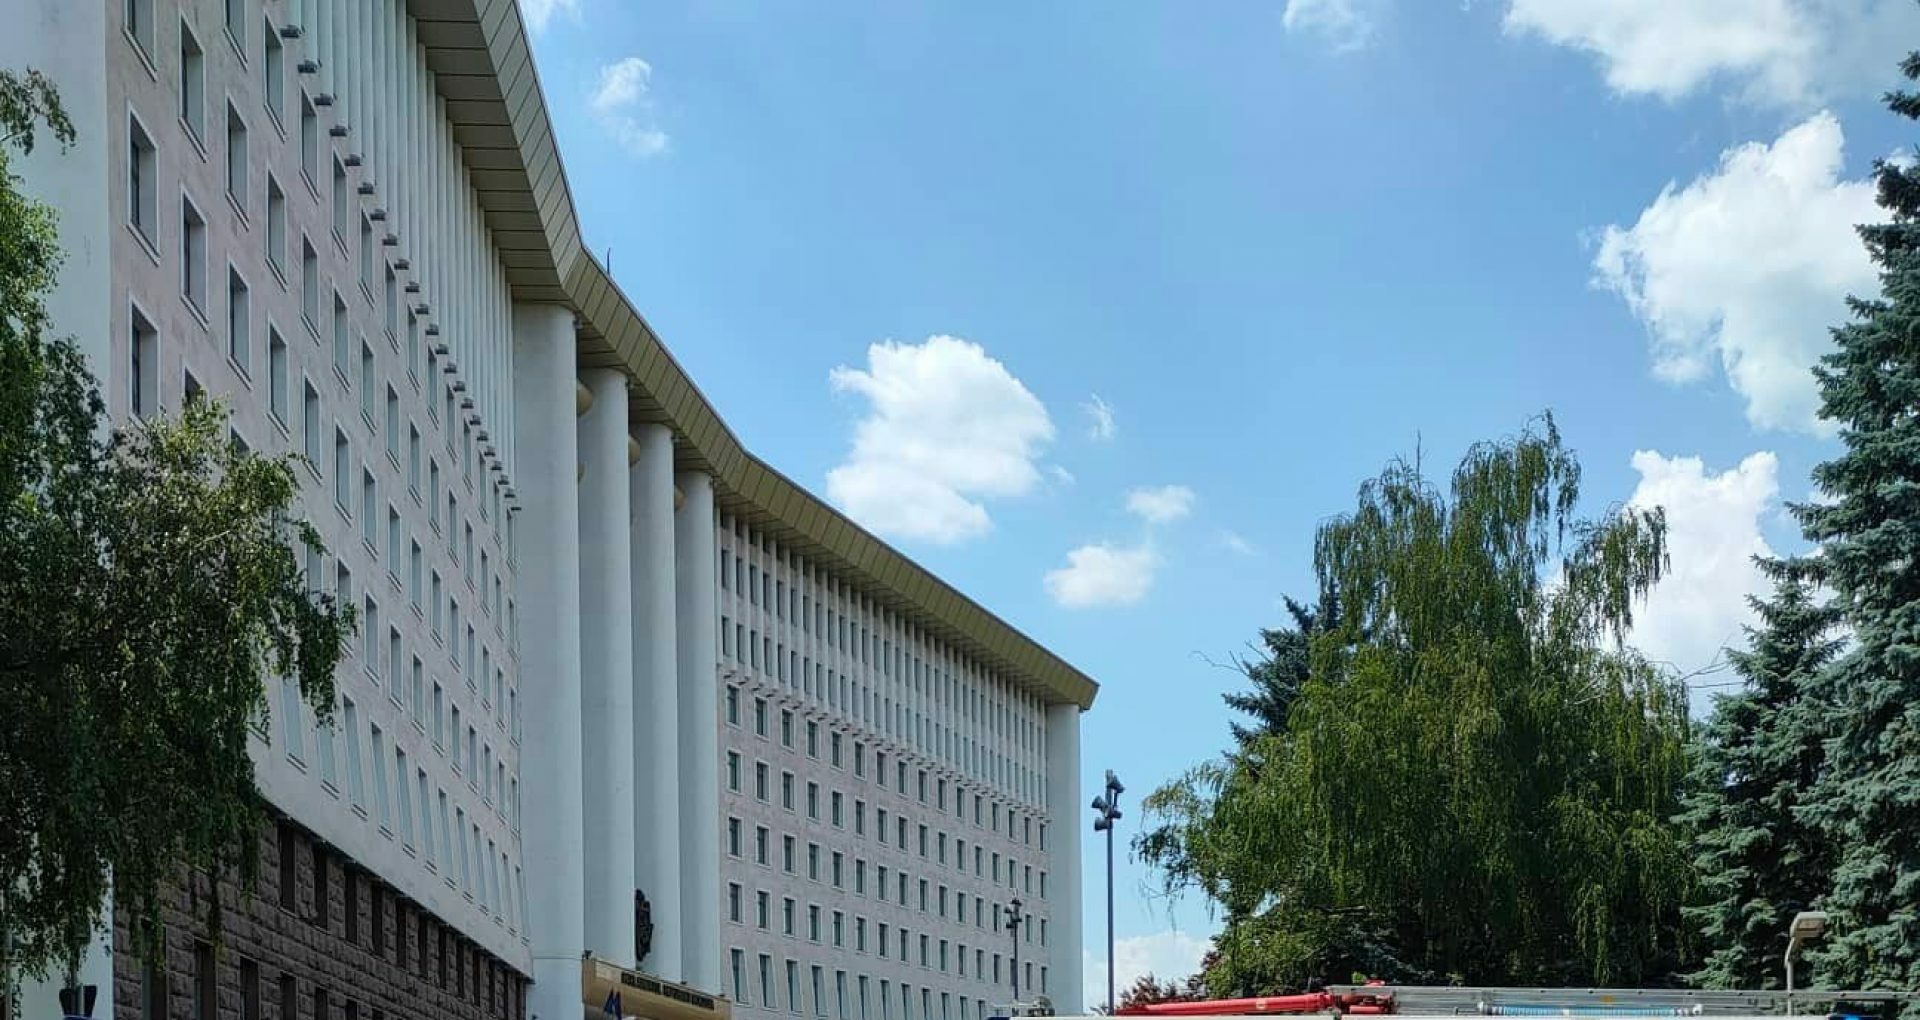 Bomb alert at Chișinău International Airport, Parliament, Government and all offices of the Chișinău Court. Details from the Moldovan Police